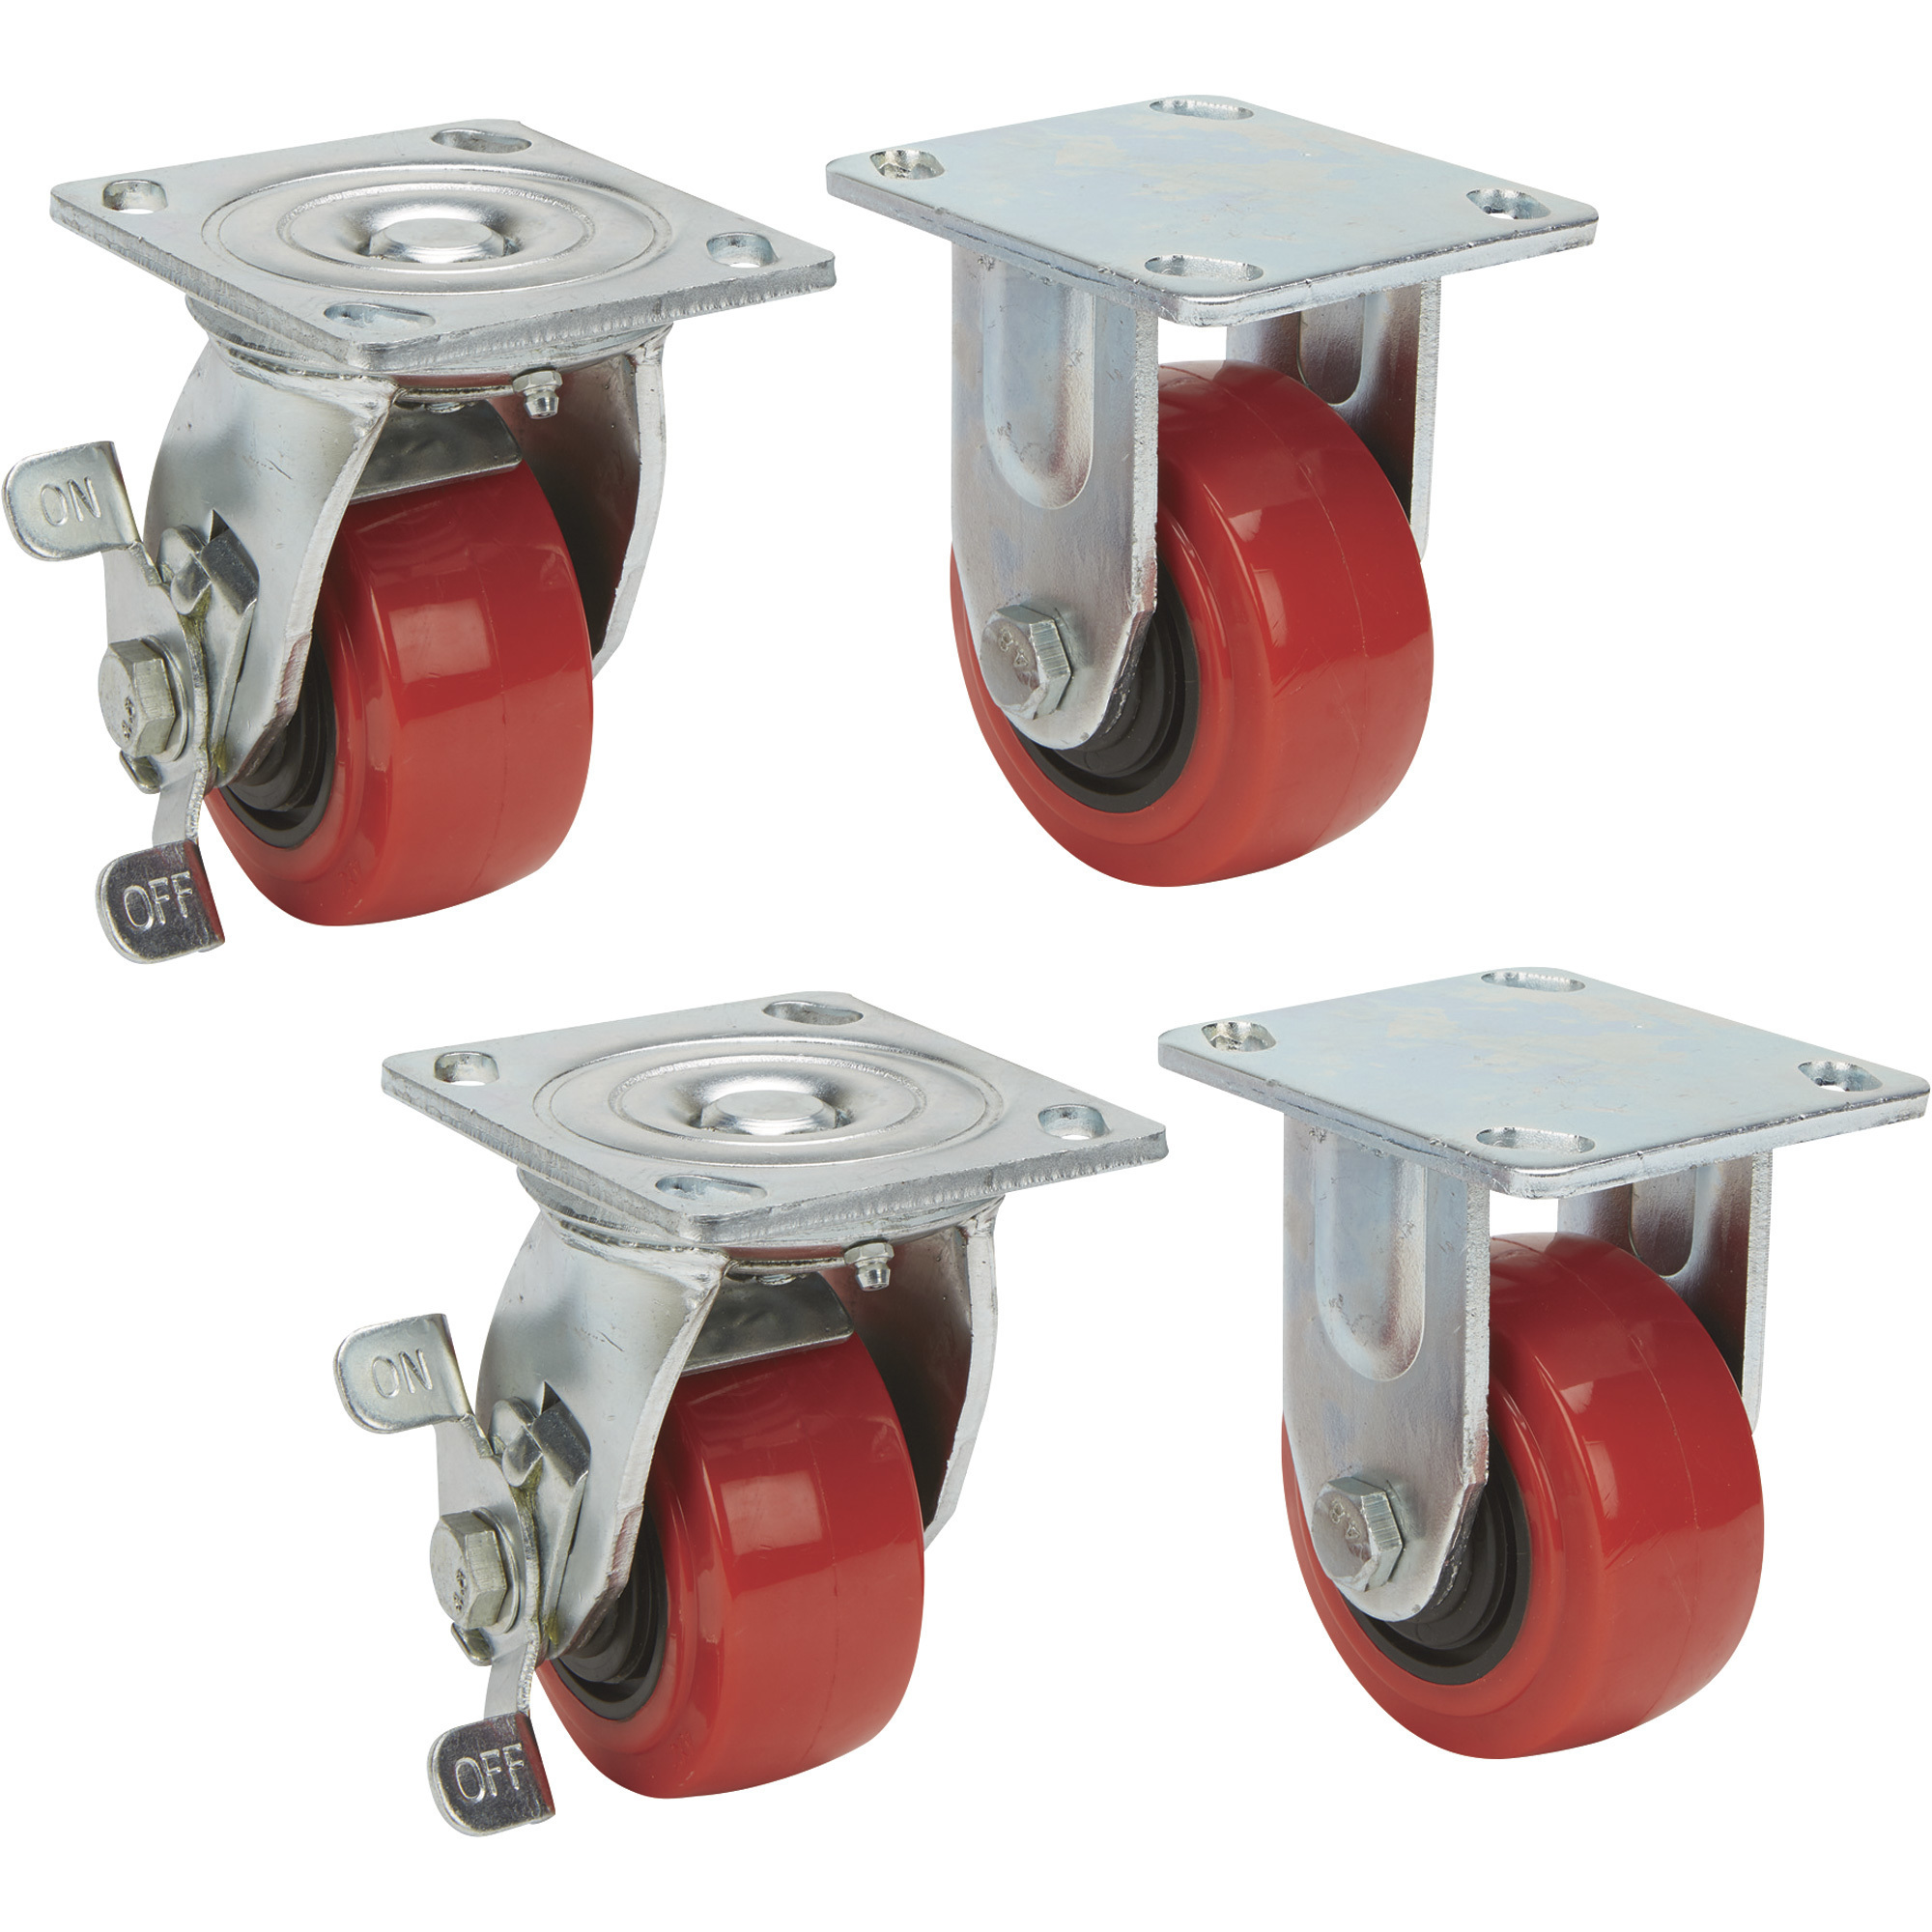 Ironton Nonmarking 4Inch Polyurethane Casters, 4-Pack, 2200-Lb. Capacity Per Set (550 lbs. Each)